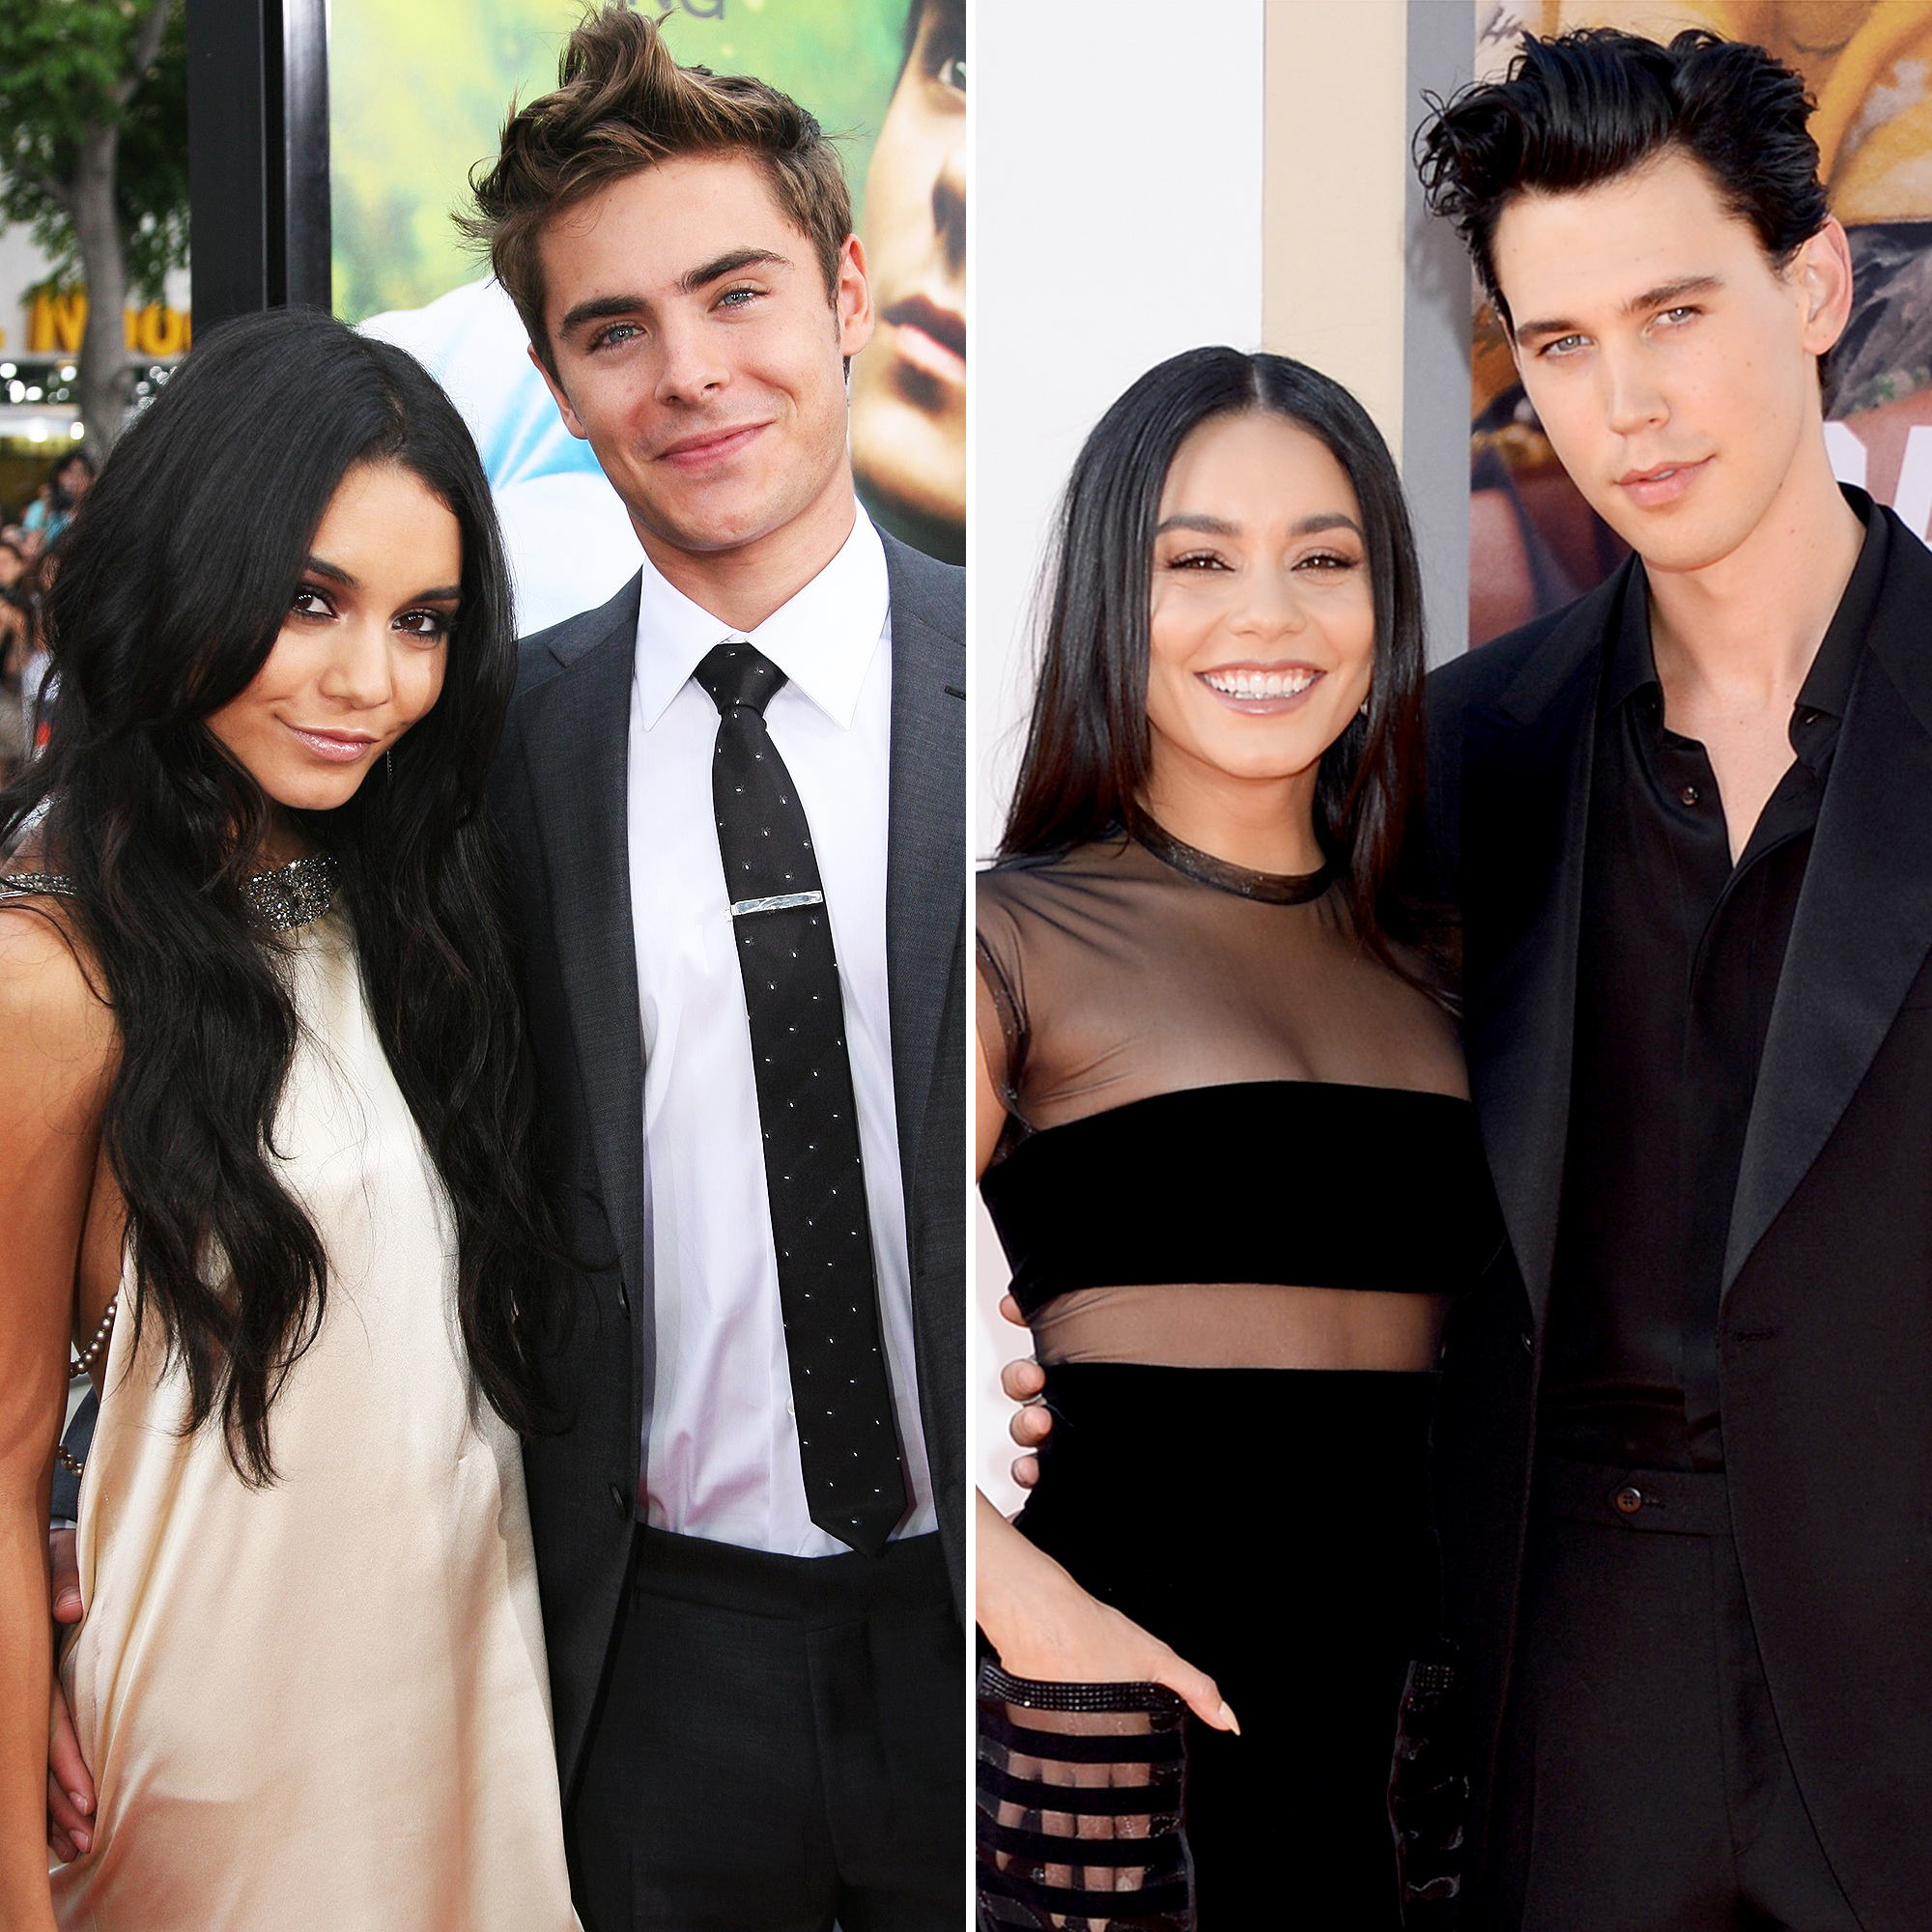 Who is vanessa hudgens currently dating 2018